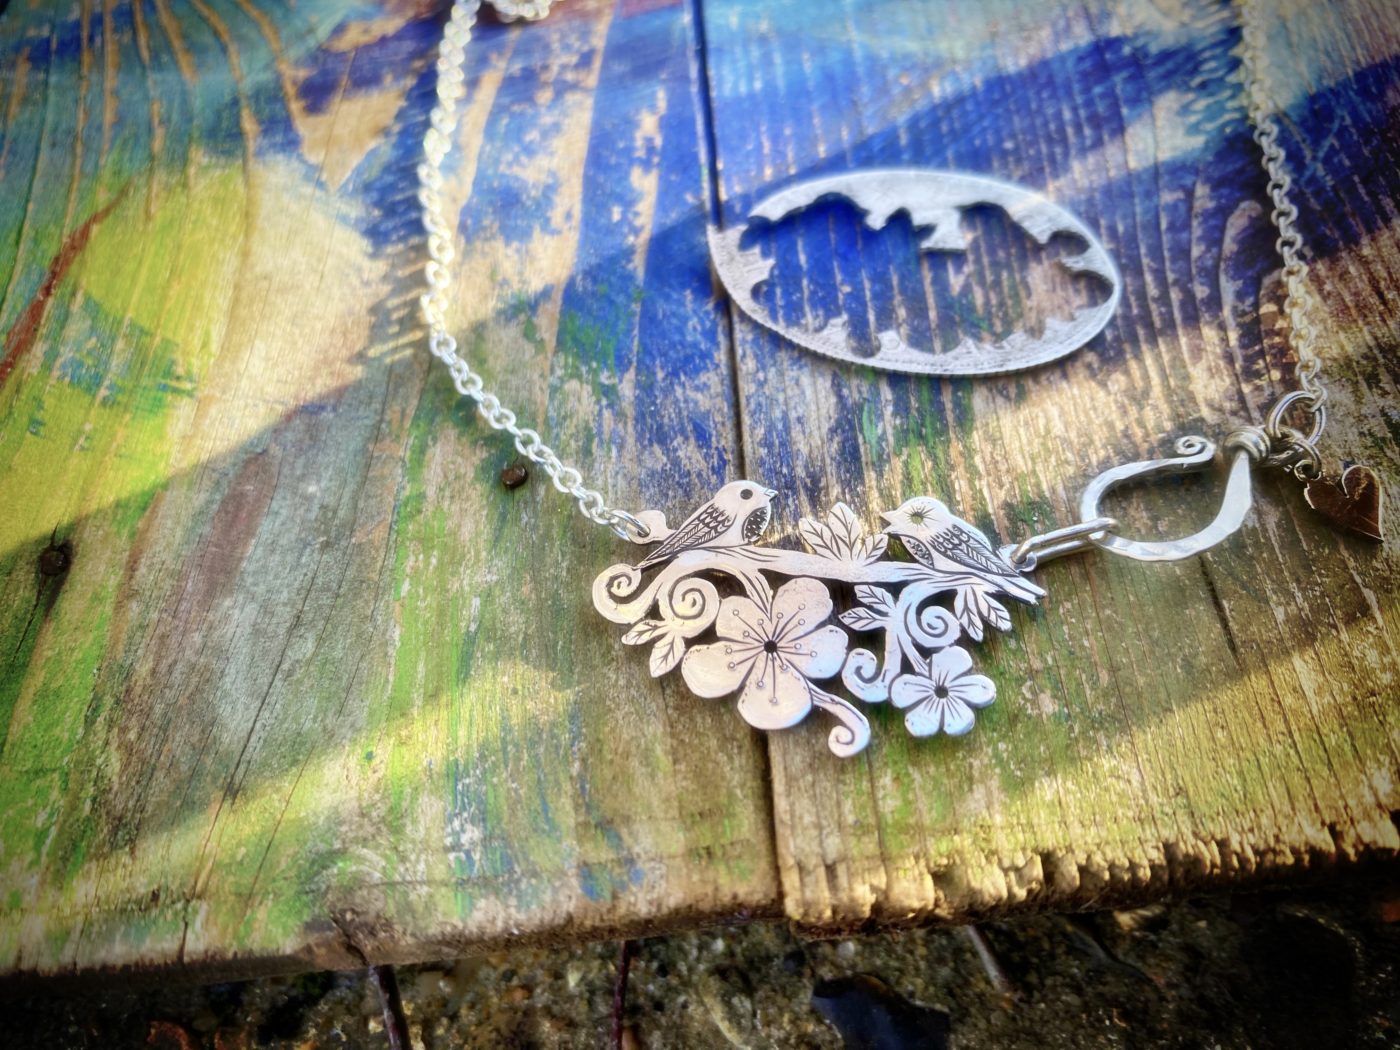 Cute bird necklace - handmade, ethical and recycled from silver shillings.